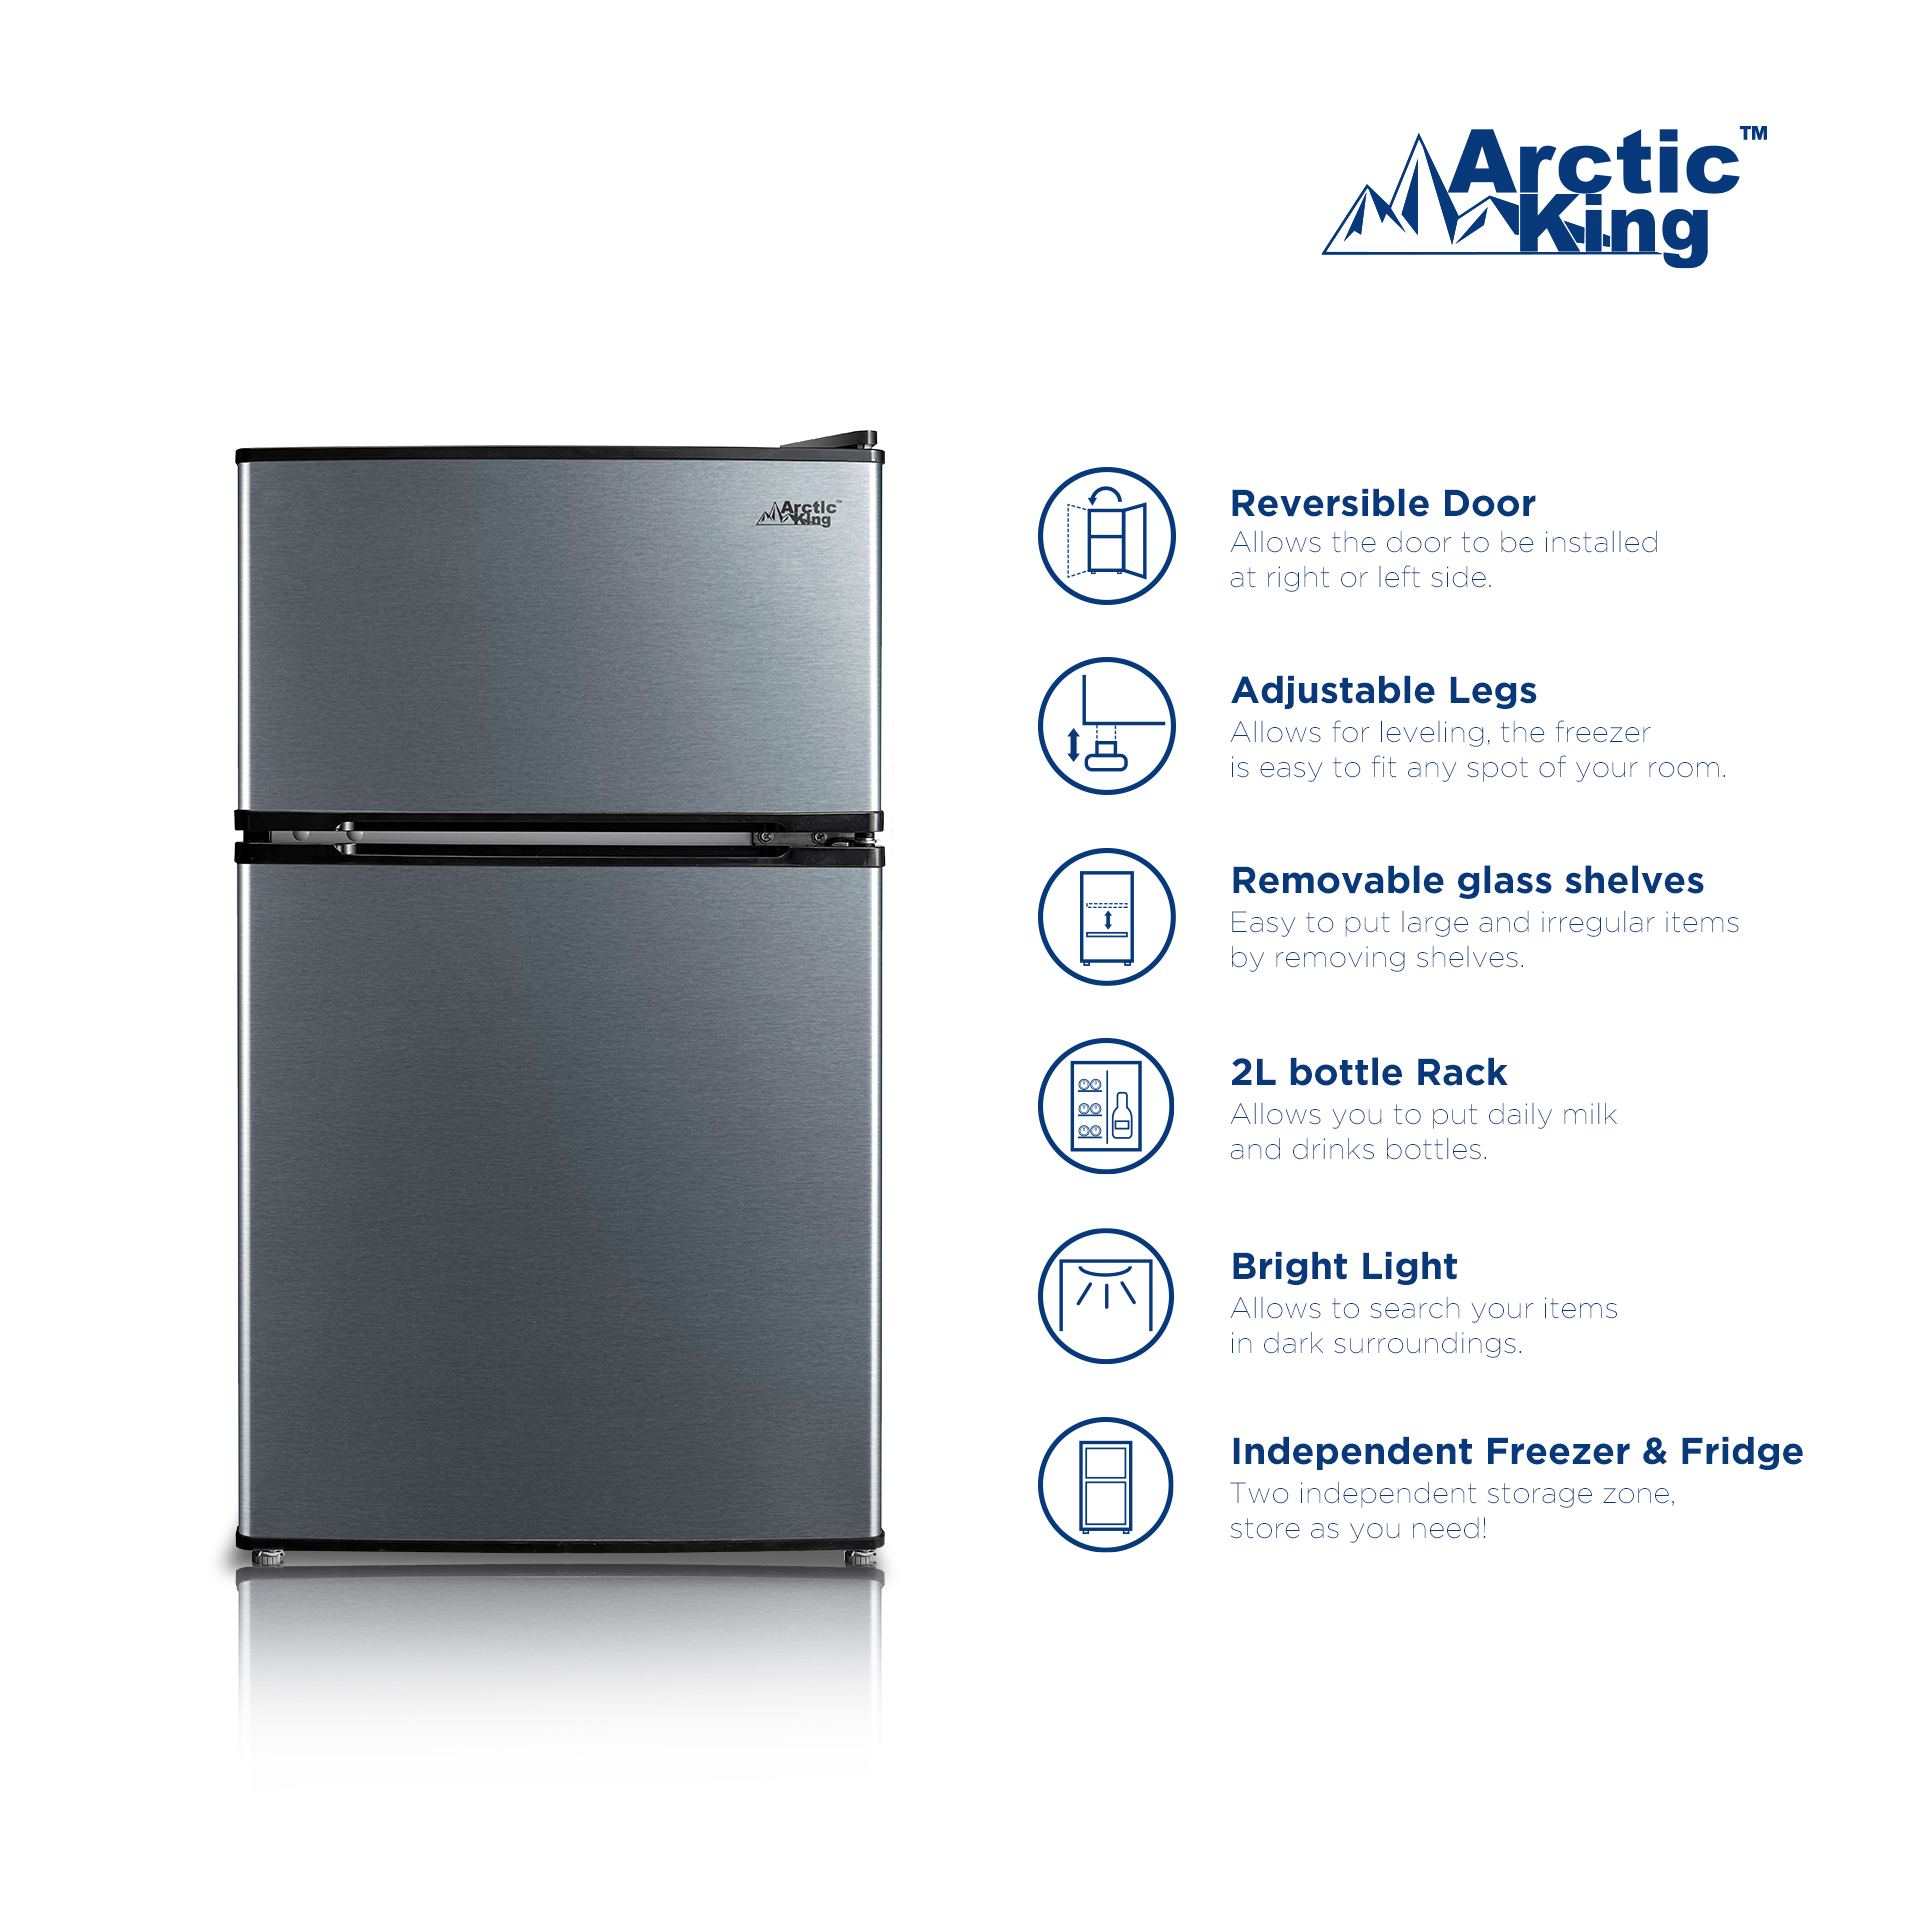 Arctic King 3.2 Cu ft Two Door Compact Refrigerator with Freezer, Black Stainless Steel look - image 3 of 18